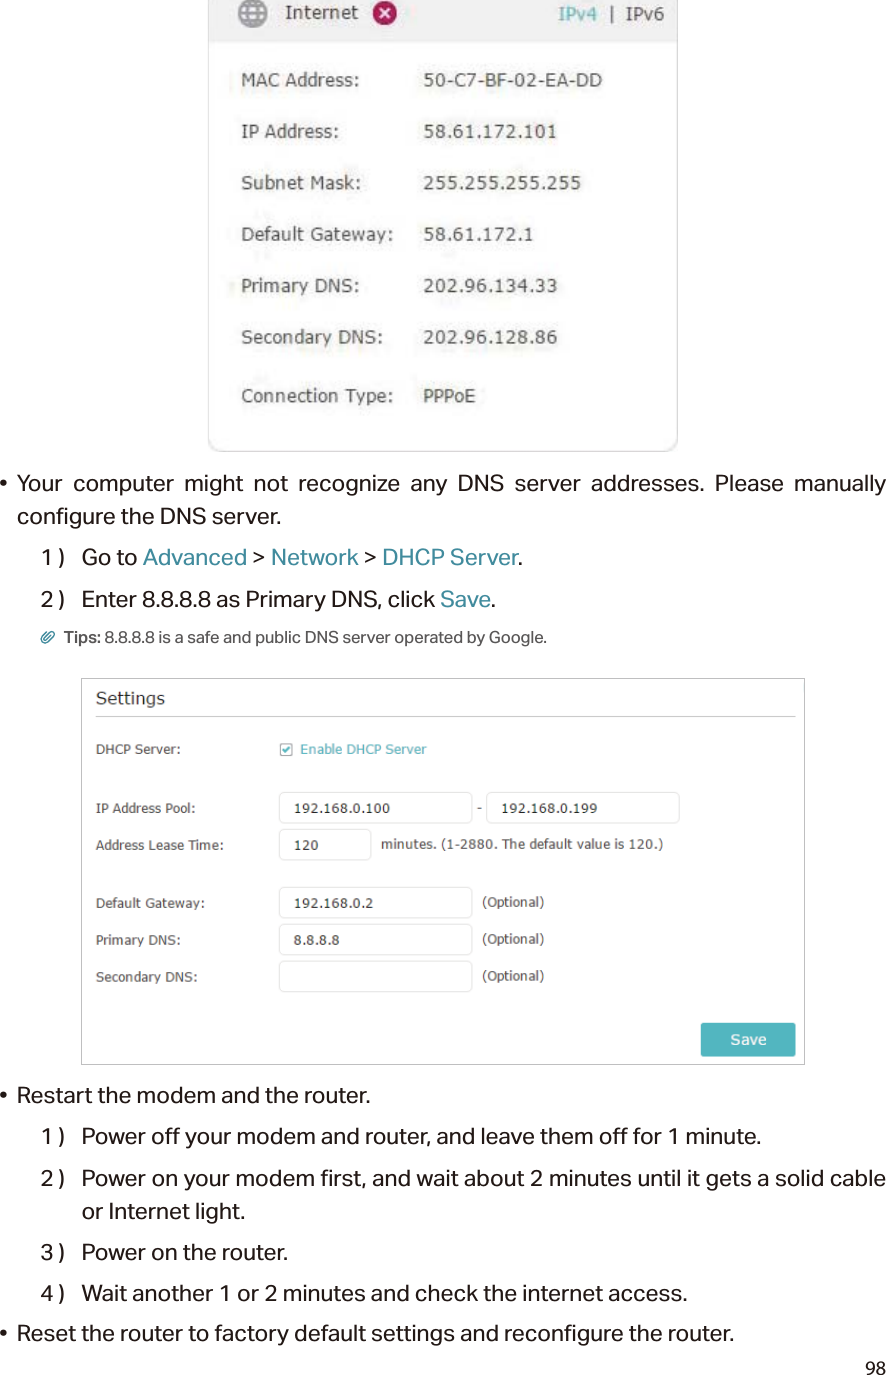 98• Your computer might not recognize any DNS server addresses. Please manually configure the DNS server.1 )  Go to Advanced &gt; Network &gt; DHCP Server.2 )  Enter 8.8.8.8 as Primary DNS, click Save. Tips: 8.8.8.8 is a safe and public DNS server operated by Google.•  Restart the modem and the router.1 )  Power off your modem and router, and leave them off for 1 minute.2 )  Power on your modem first, and wait about 2 minutes until it gets a solid cable or Internet light.3 )  Power on the router.4 )  Wait another 1 or 2 minutes and check the internet access.•  Reset the router to factory default settings and reconfigure the router.